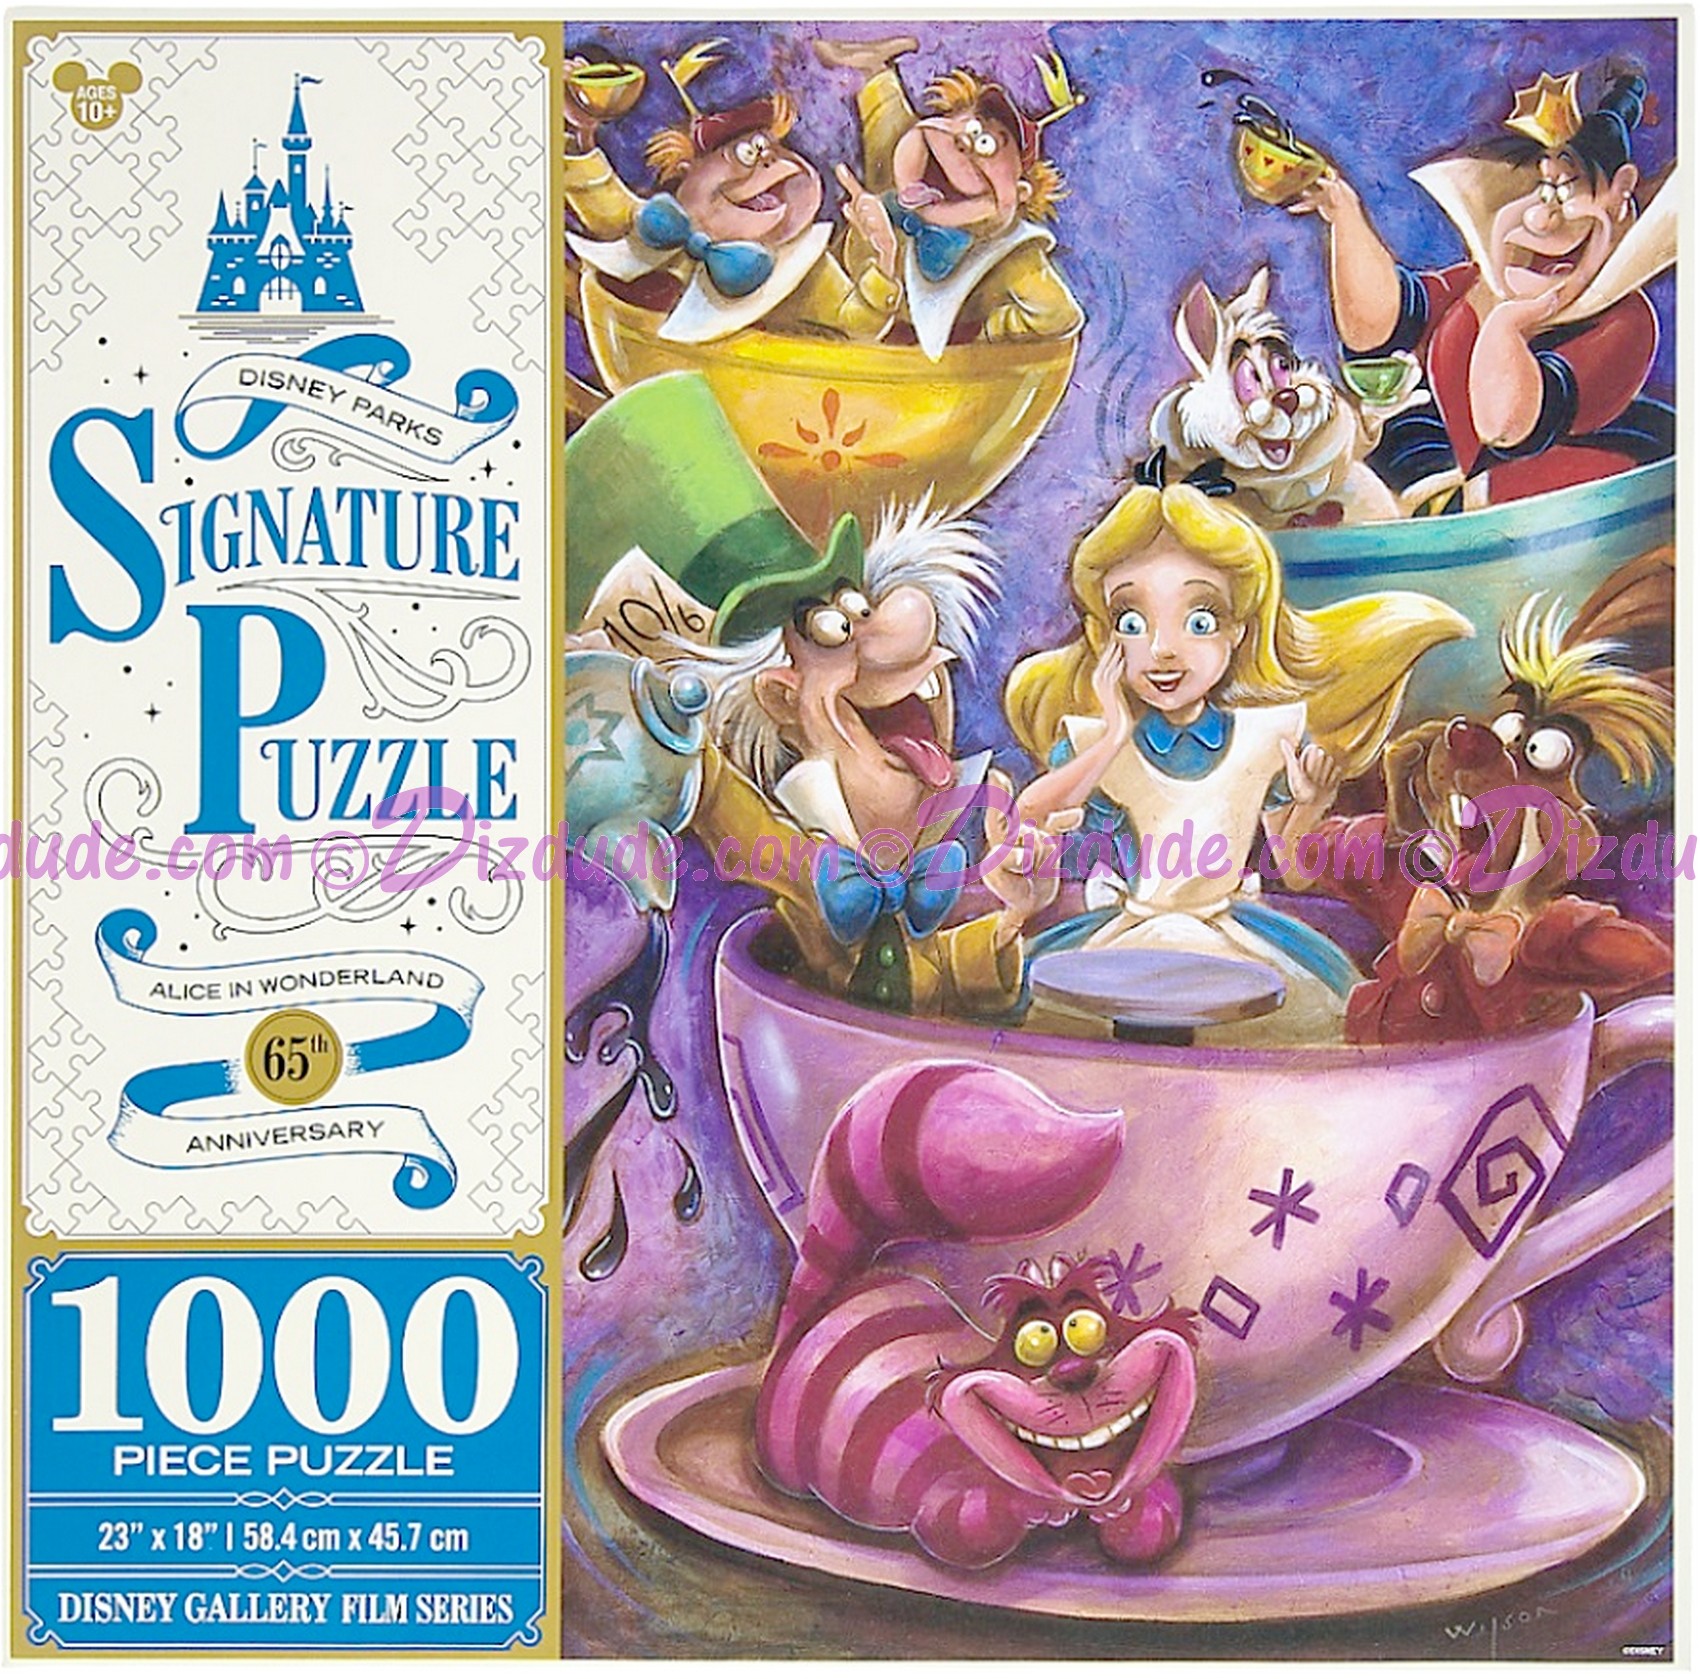 Alice in a Teacup 65th Anniversary 1000